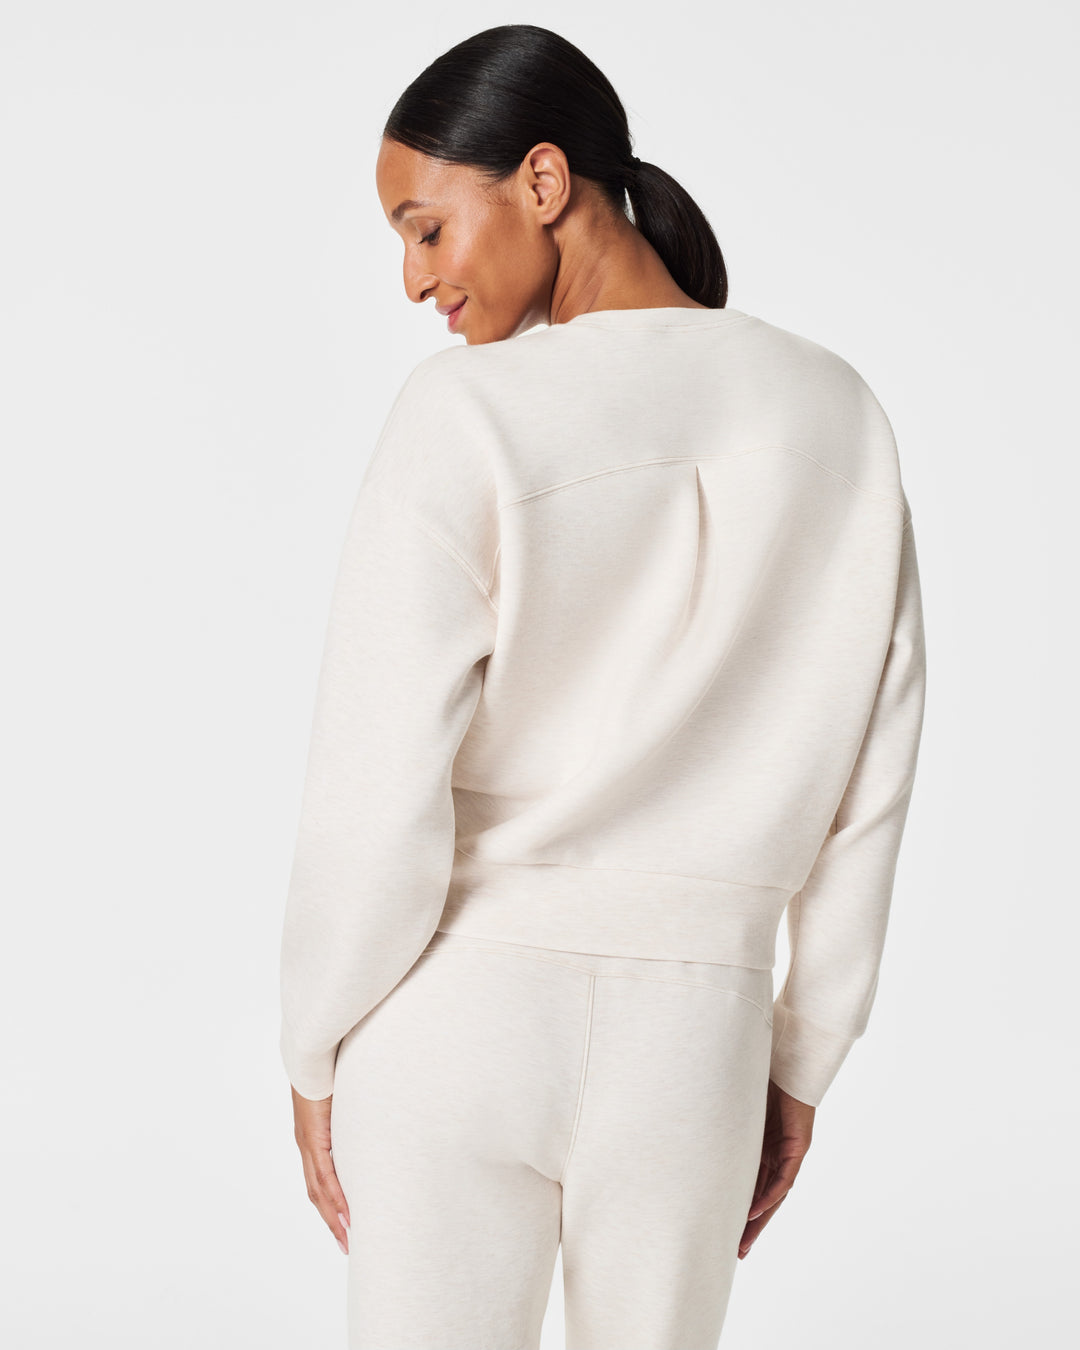 SPANX AIRESSENTIALS CREW TOP - OATMEAL HEATHER